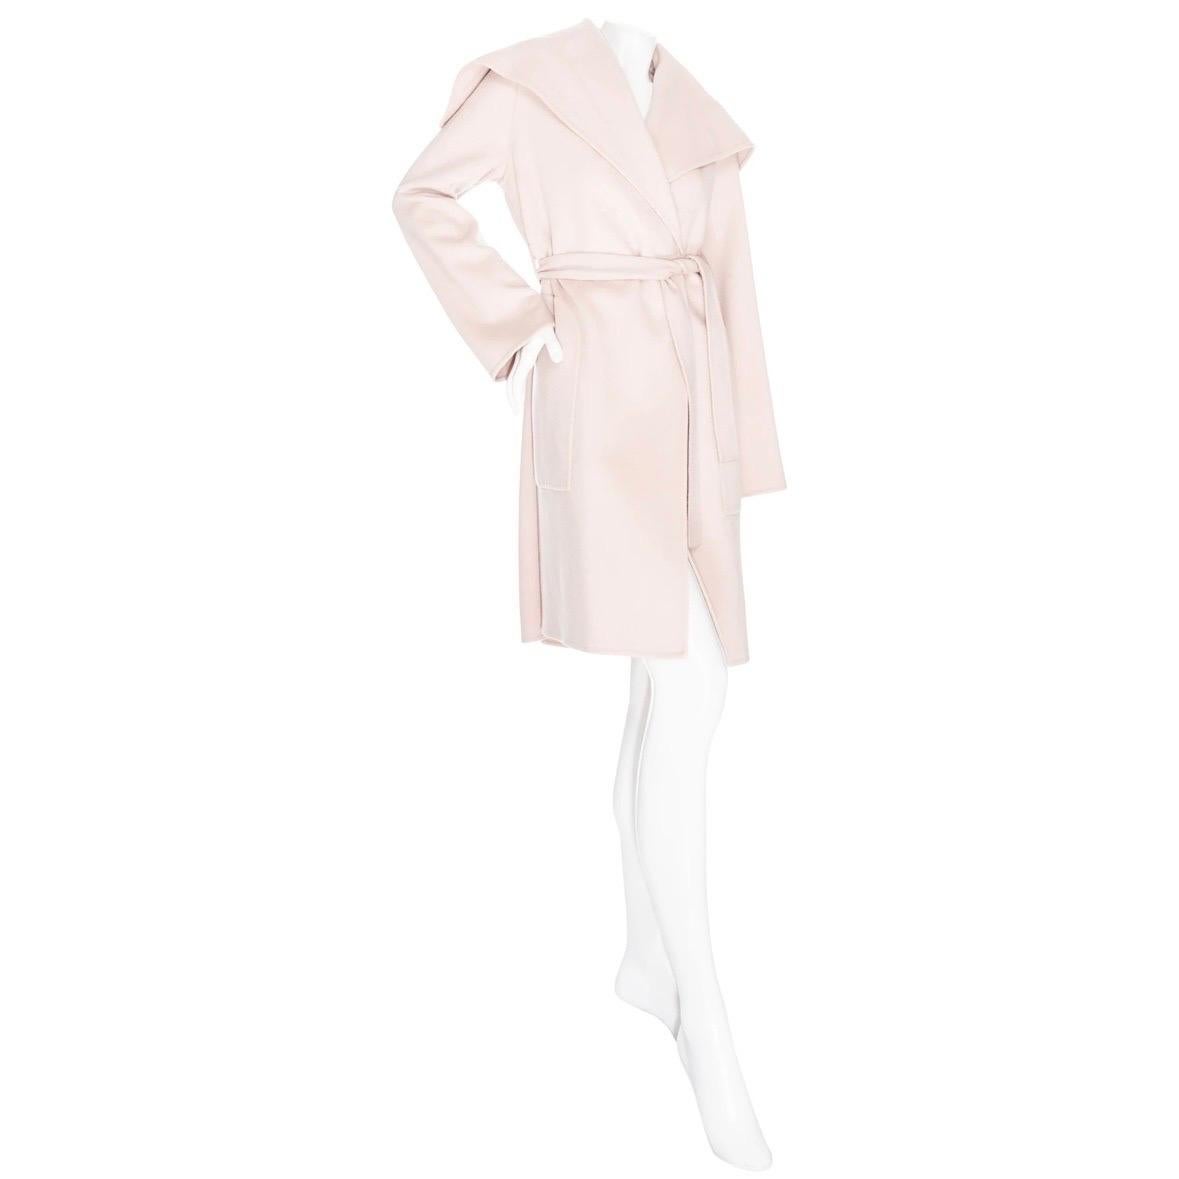 Hermès Light Pink Cashmere Wide Collar Coat 

Dusty Light Pink/Blush
Wide collar
Wrap front with interior button fastening at waist
Top button fastening for optional wide shawl collar
Self-tie belt sash
Side patch pockets
Made in France
100%